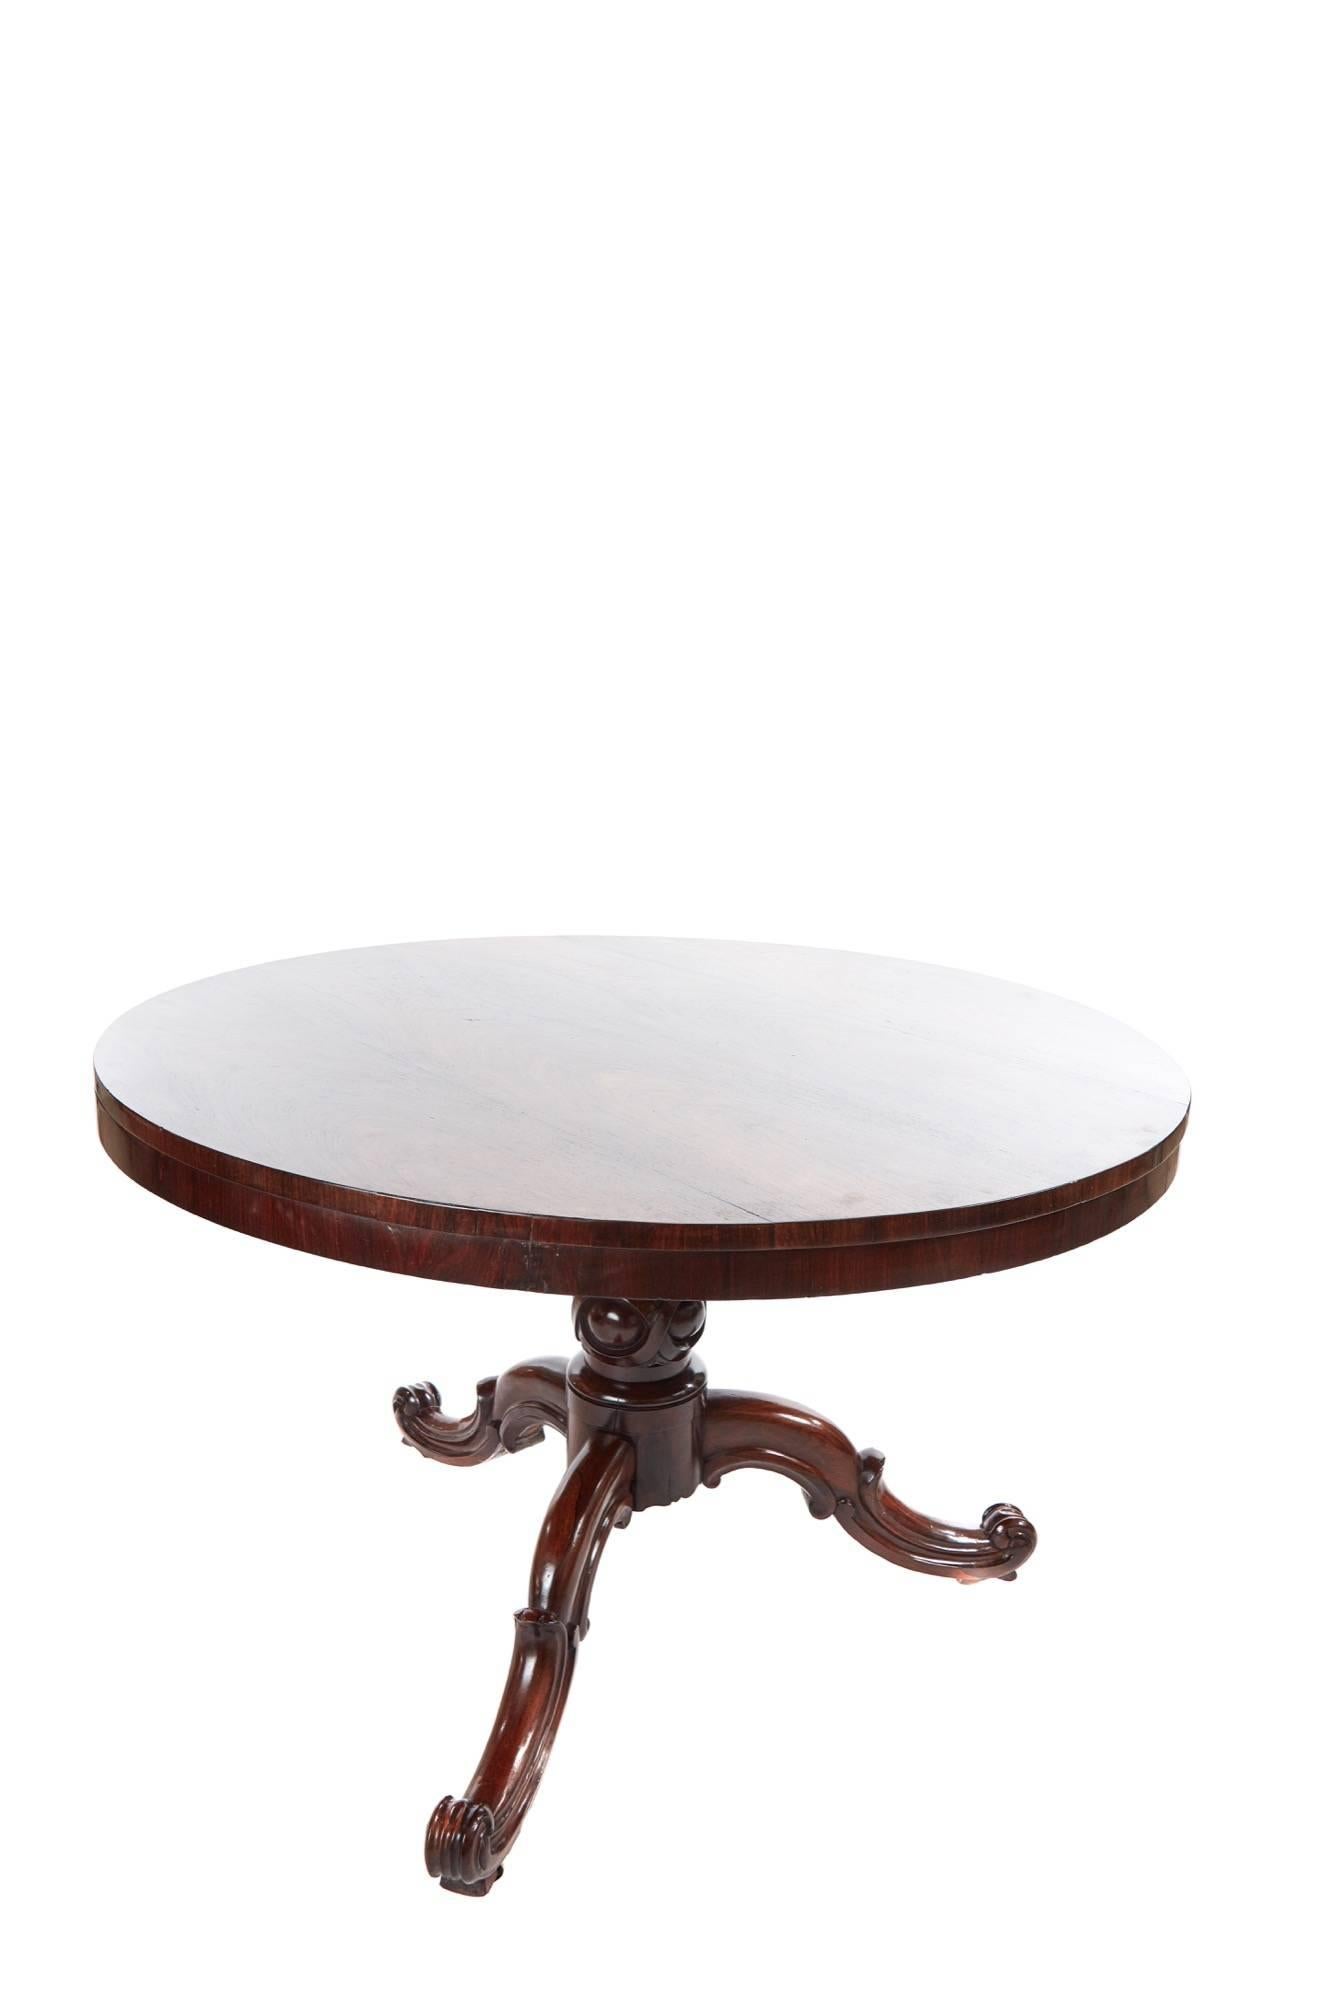 Victorian round rosewood centre table, with a lovely figured rosewood tilt top, solid rosewood carved turned column support with three carved solid rosewood shaped cabriole legs, original castors
Fantastic color and condition.